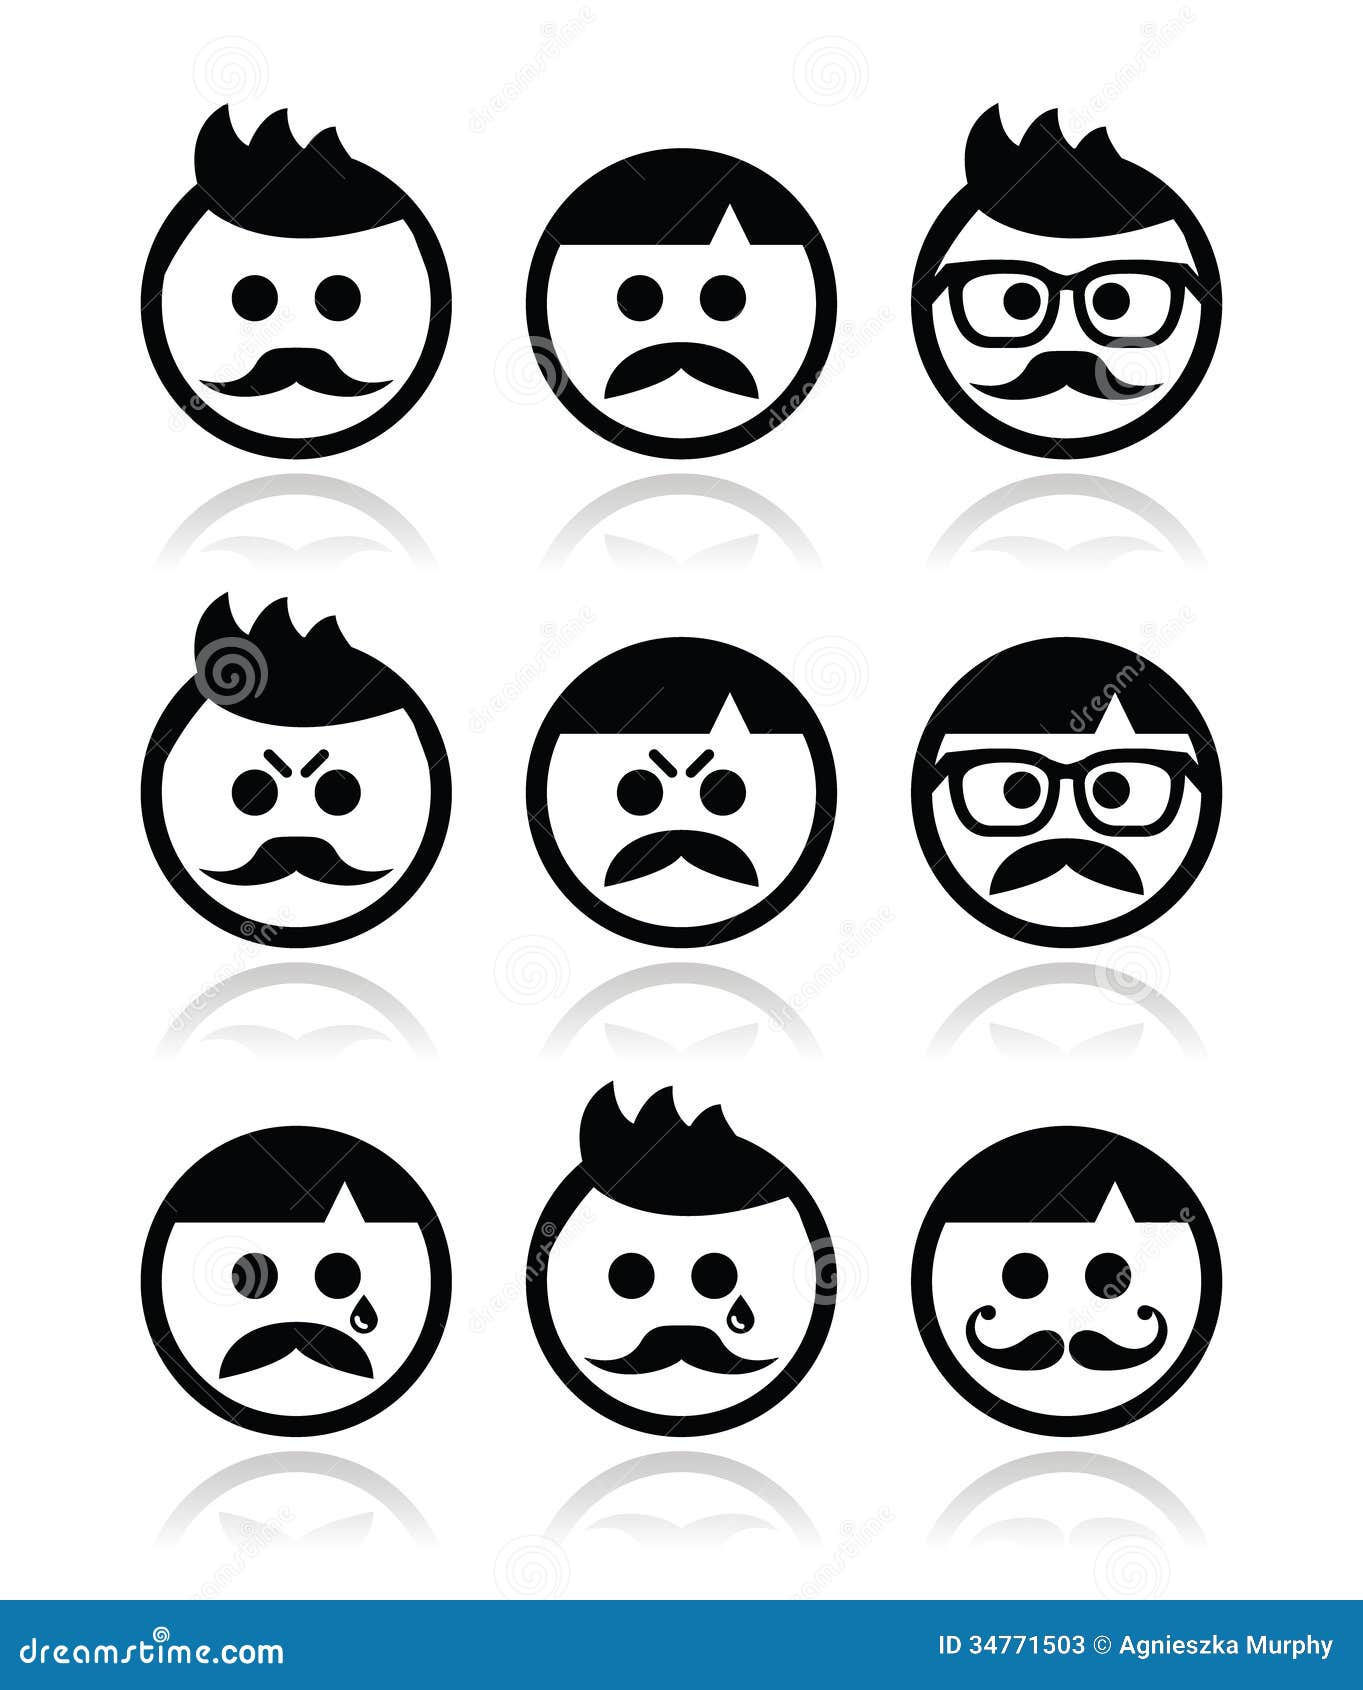 Man with moustache or mustache avatar icons set